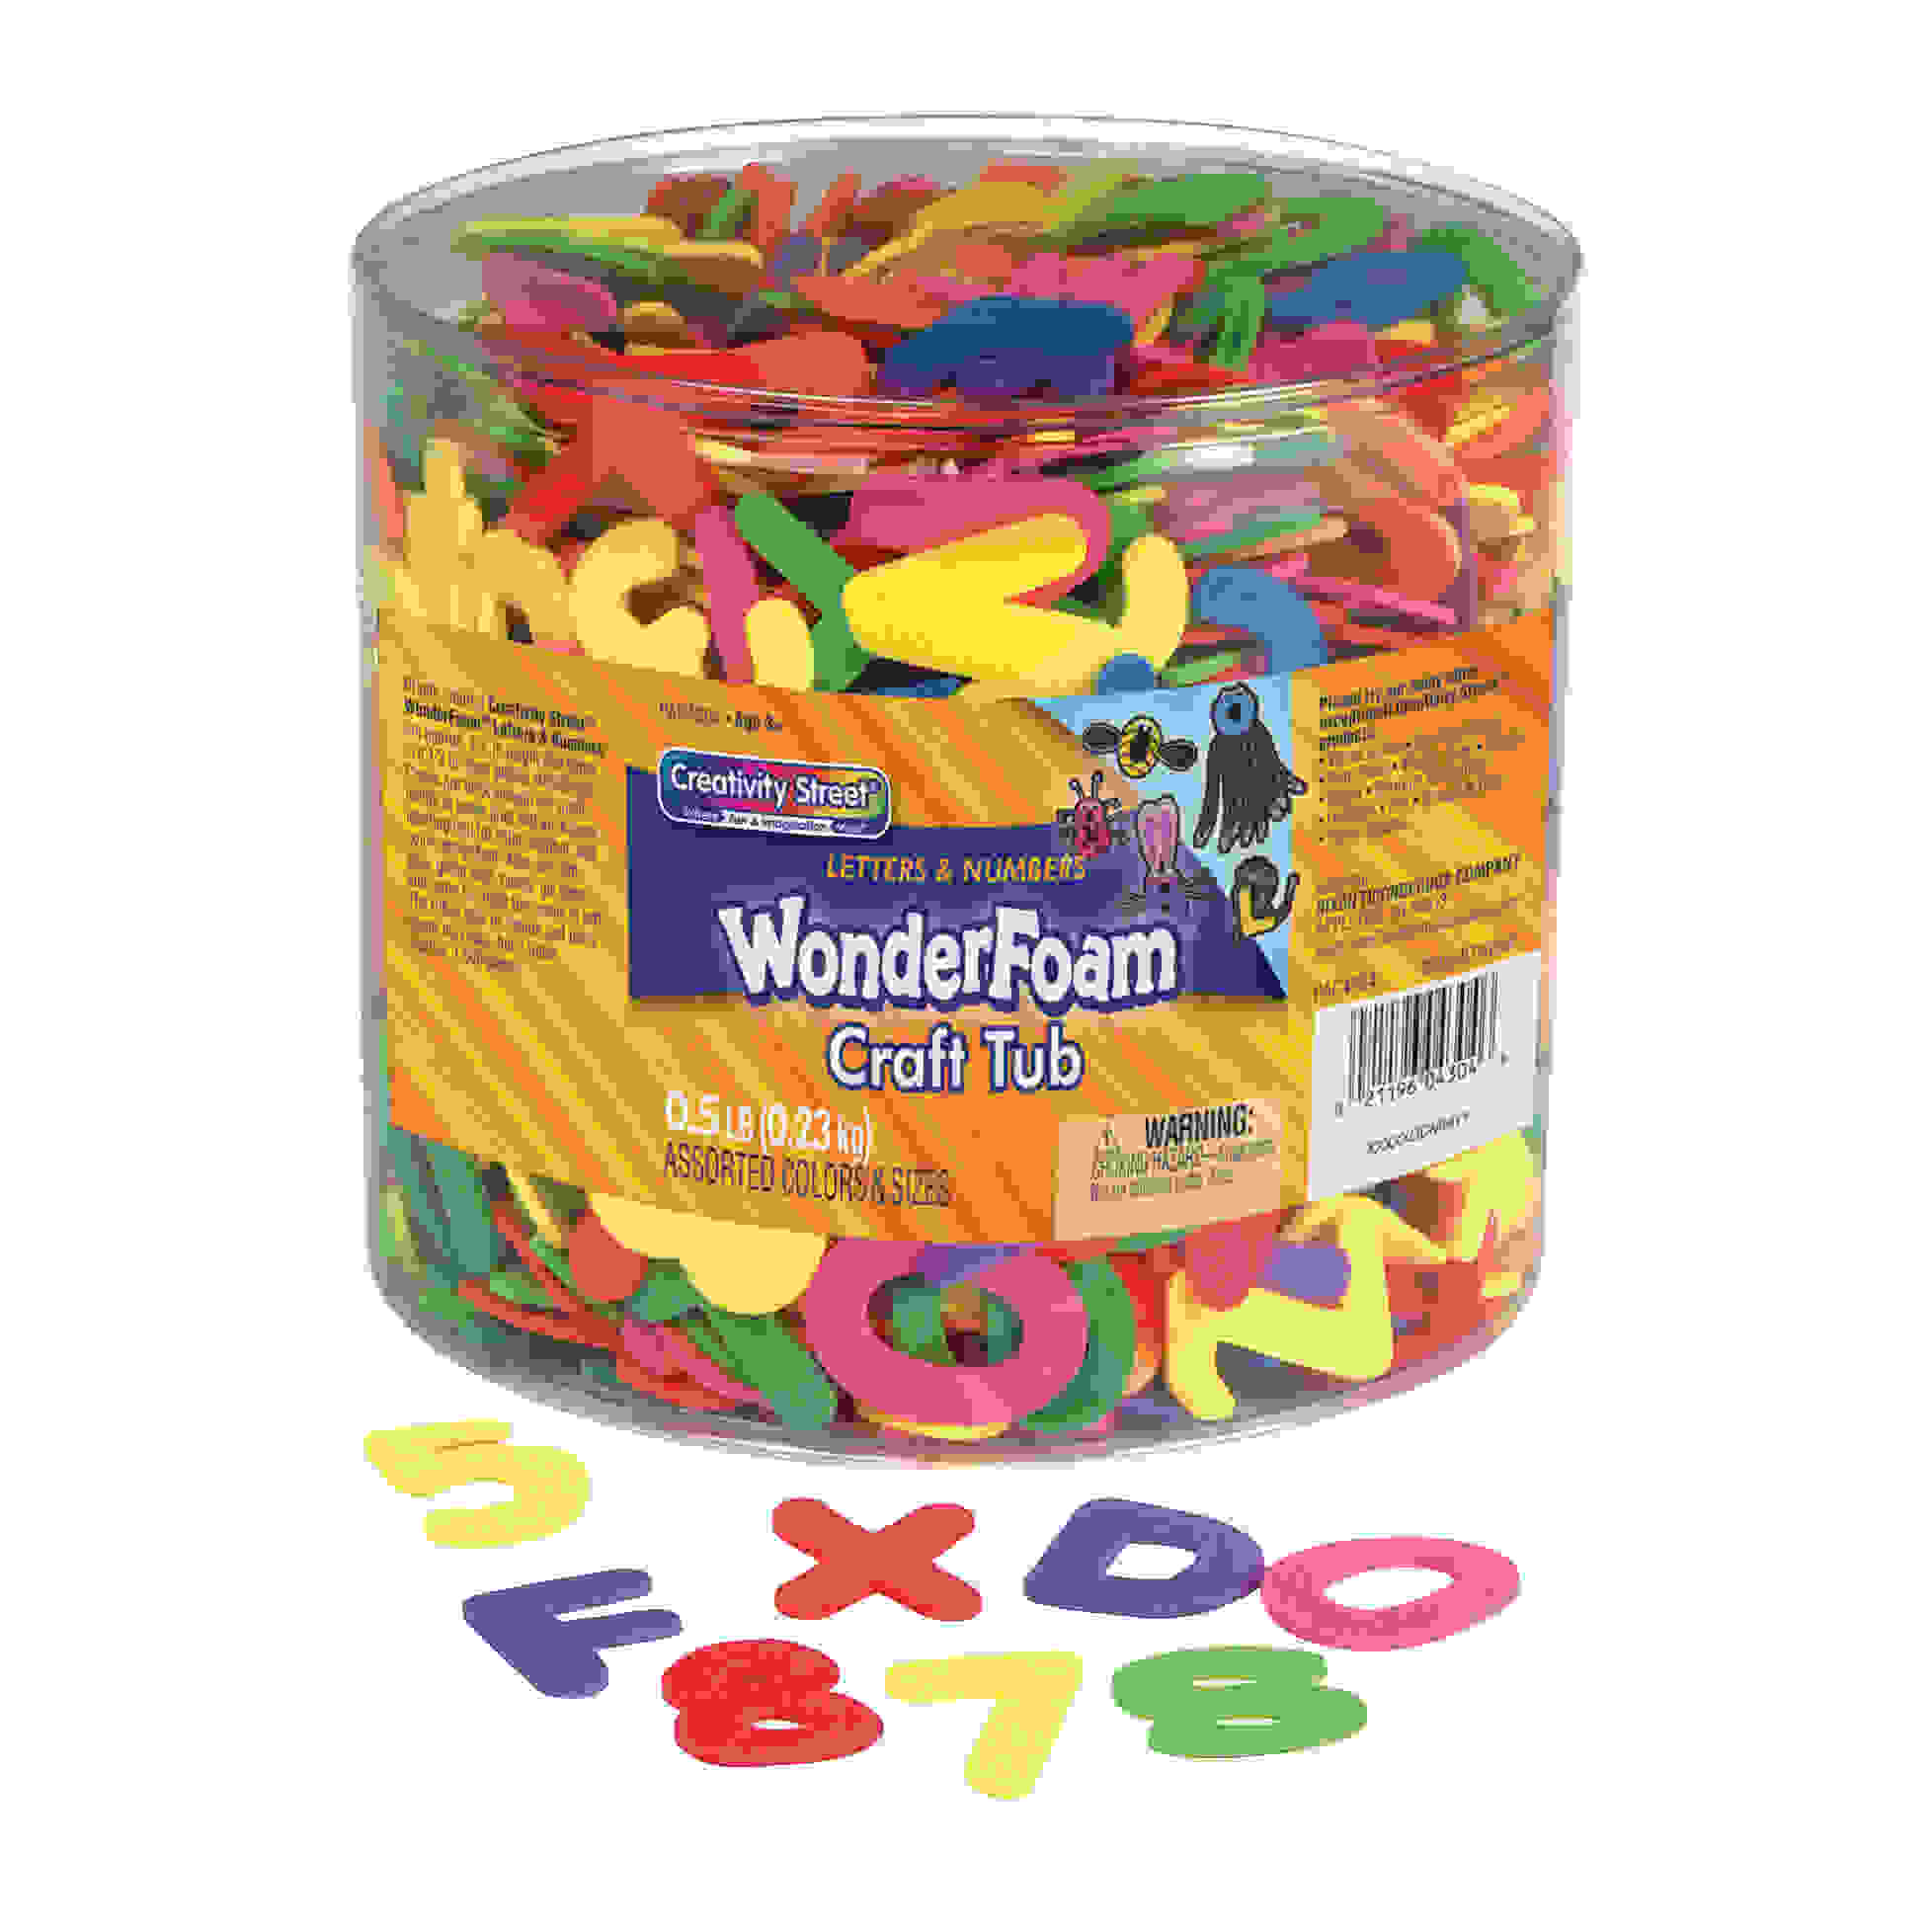 WonderFoam Craft Tub, Letters and Numbers, Assorted Sizes, 1/2 lb